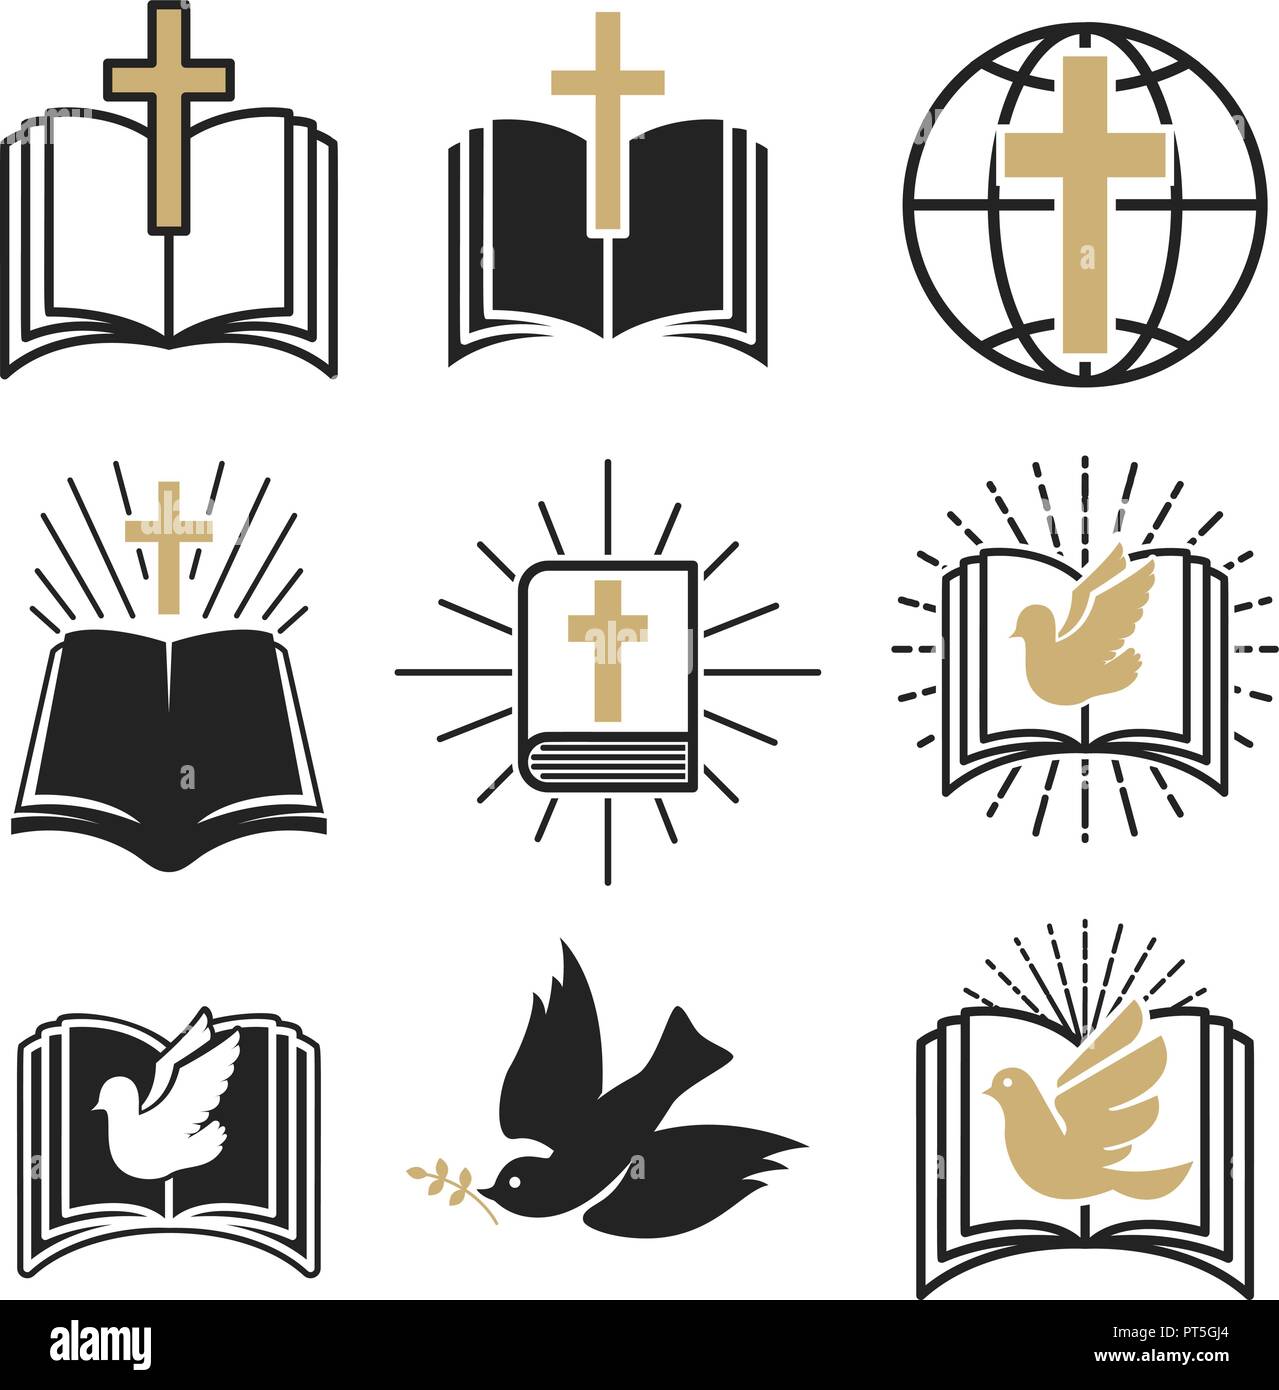 Set of religious signs. Cross with dove, holy spirit, bible. Design elements for emblem, sign, badge. Vector illustration Stock Vector